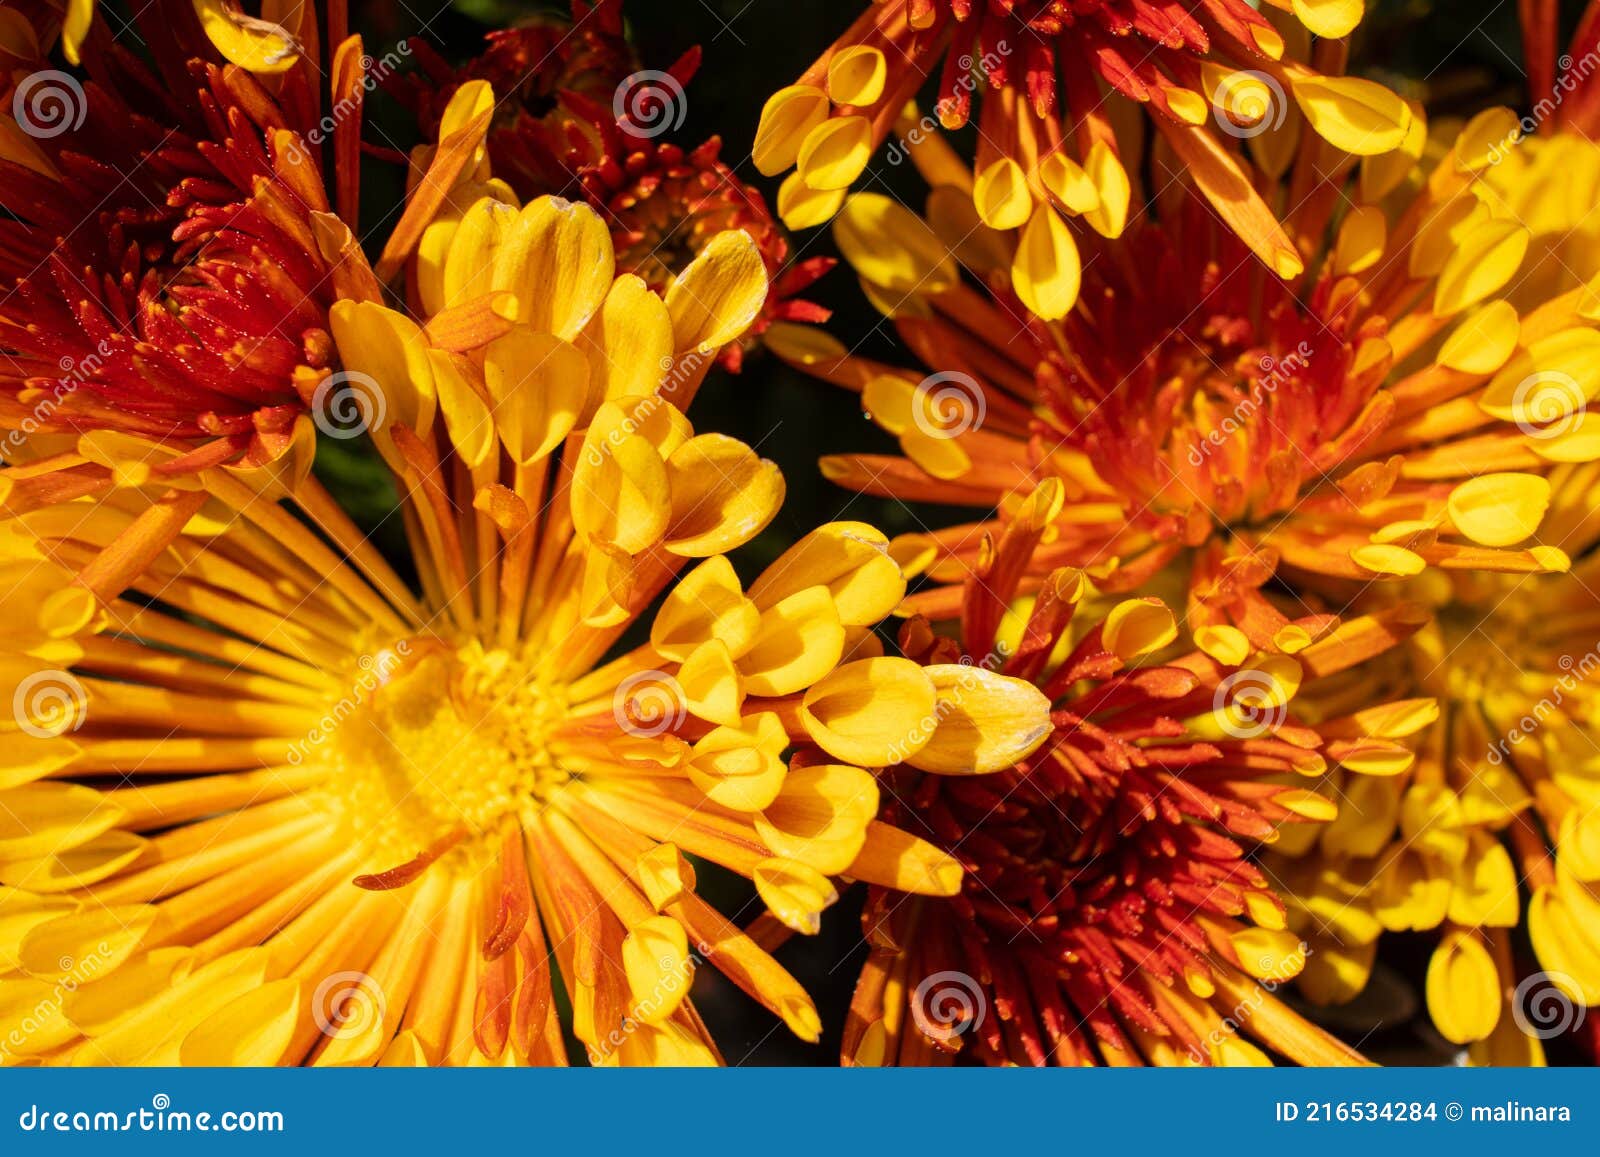 Bright Yellow, Orange and Red Flowers Filling the Frame. Floral